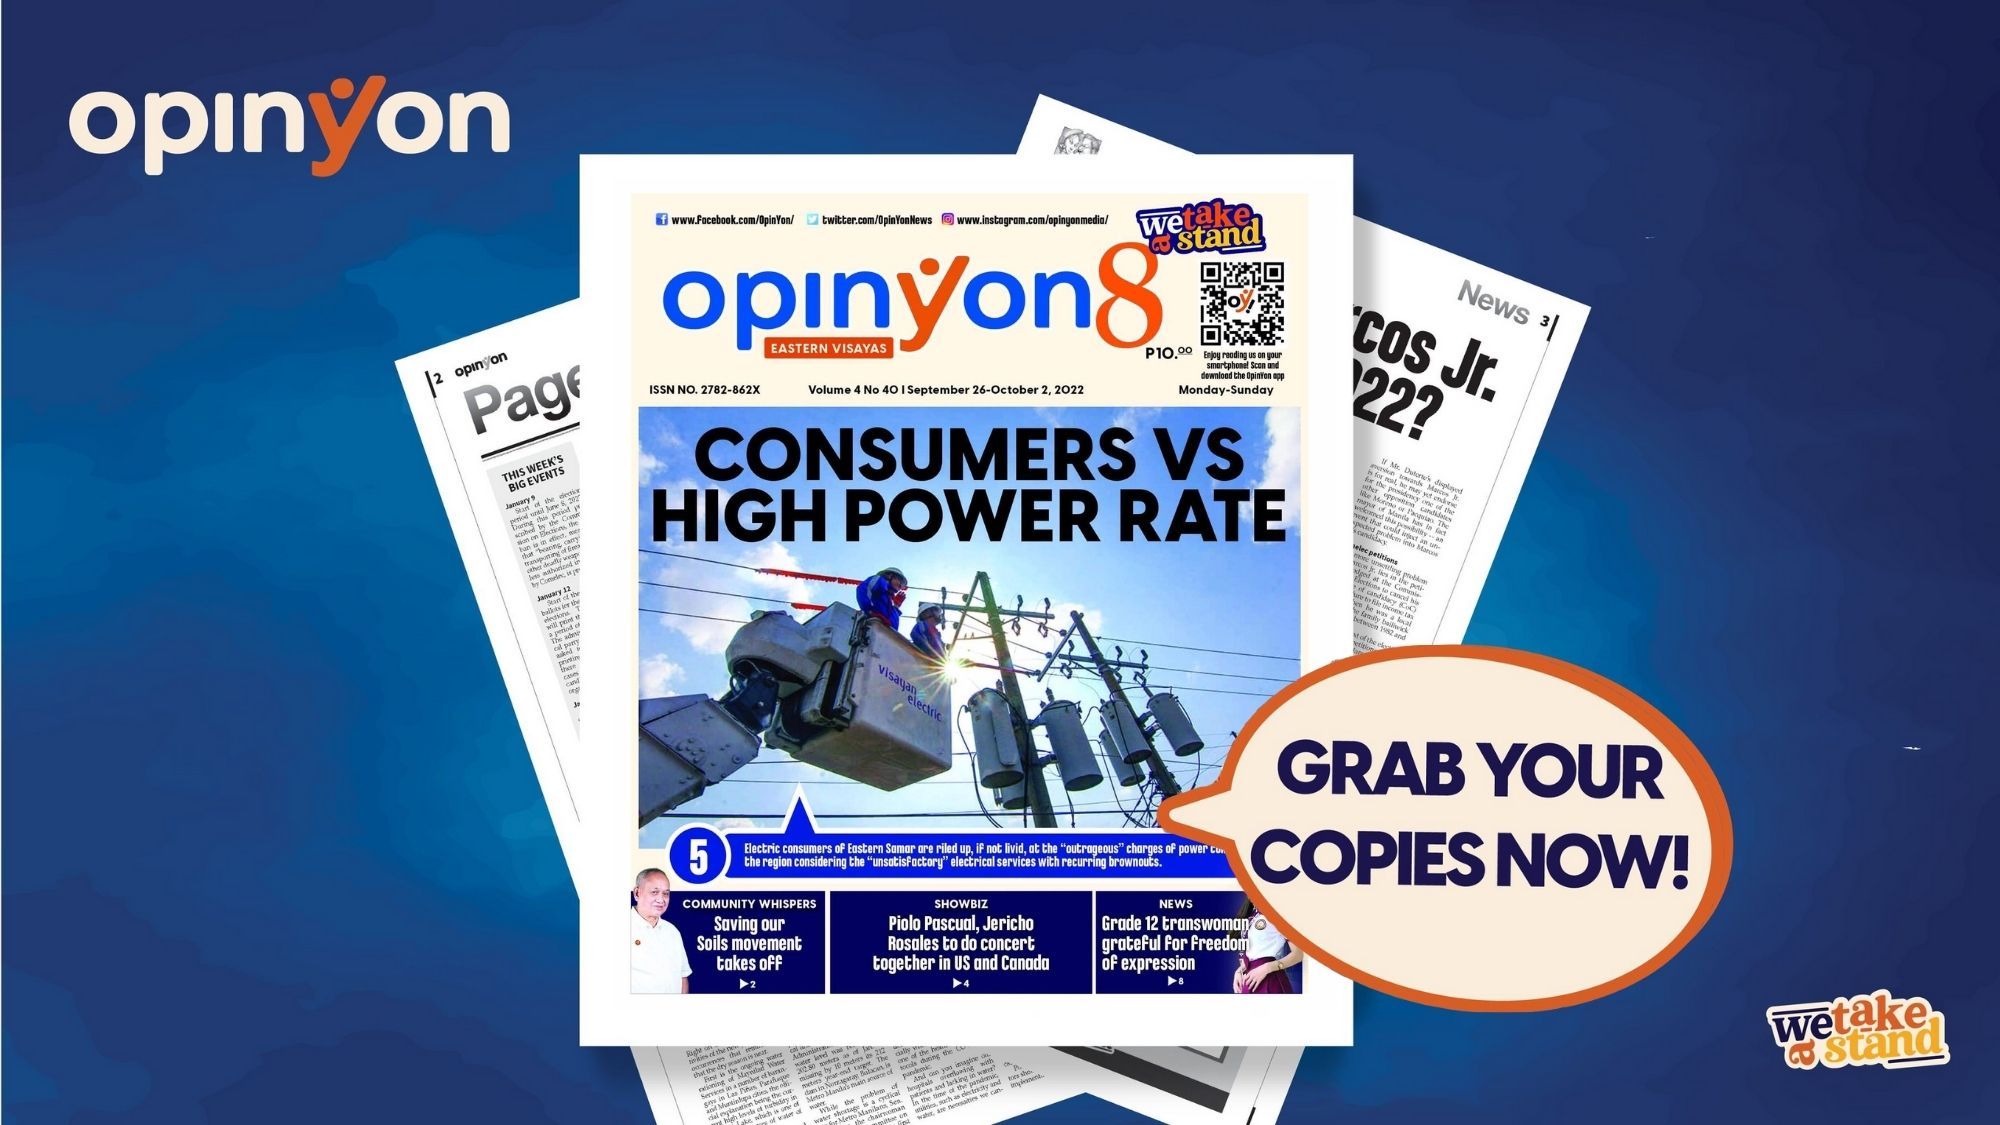 Consumers vs high power rate